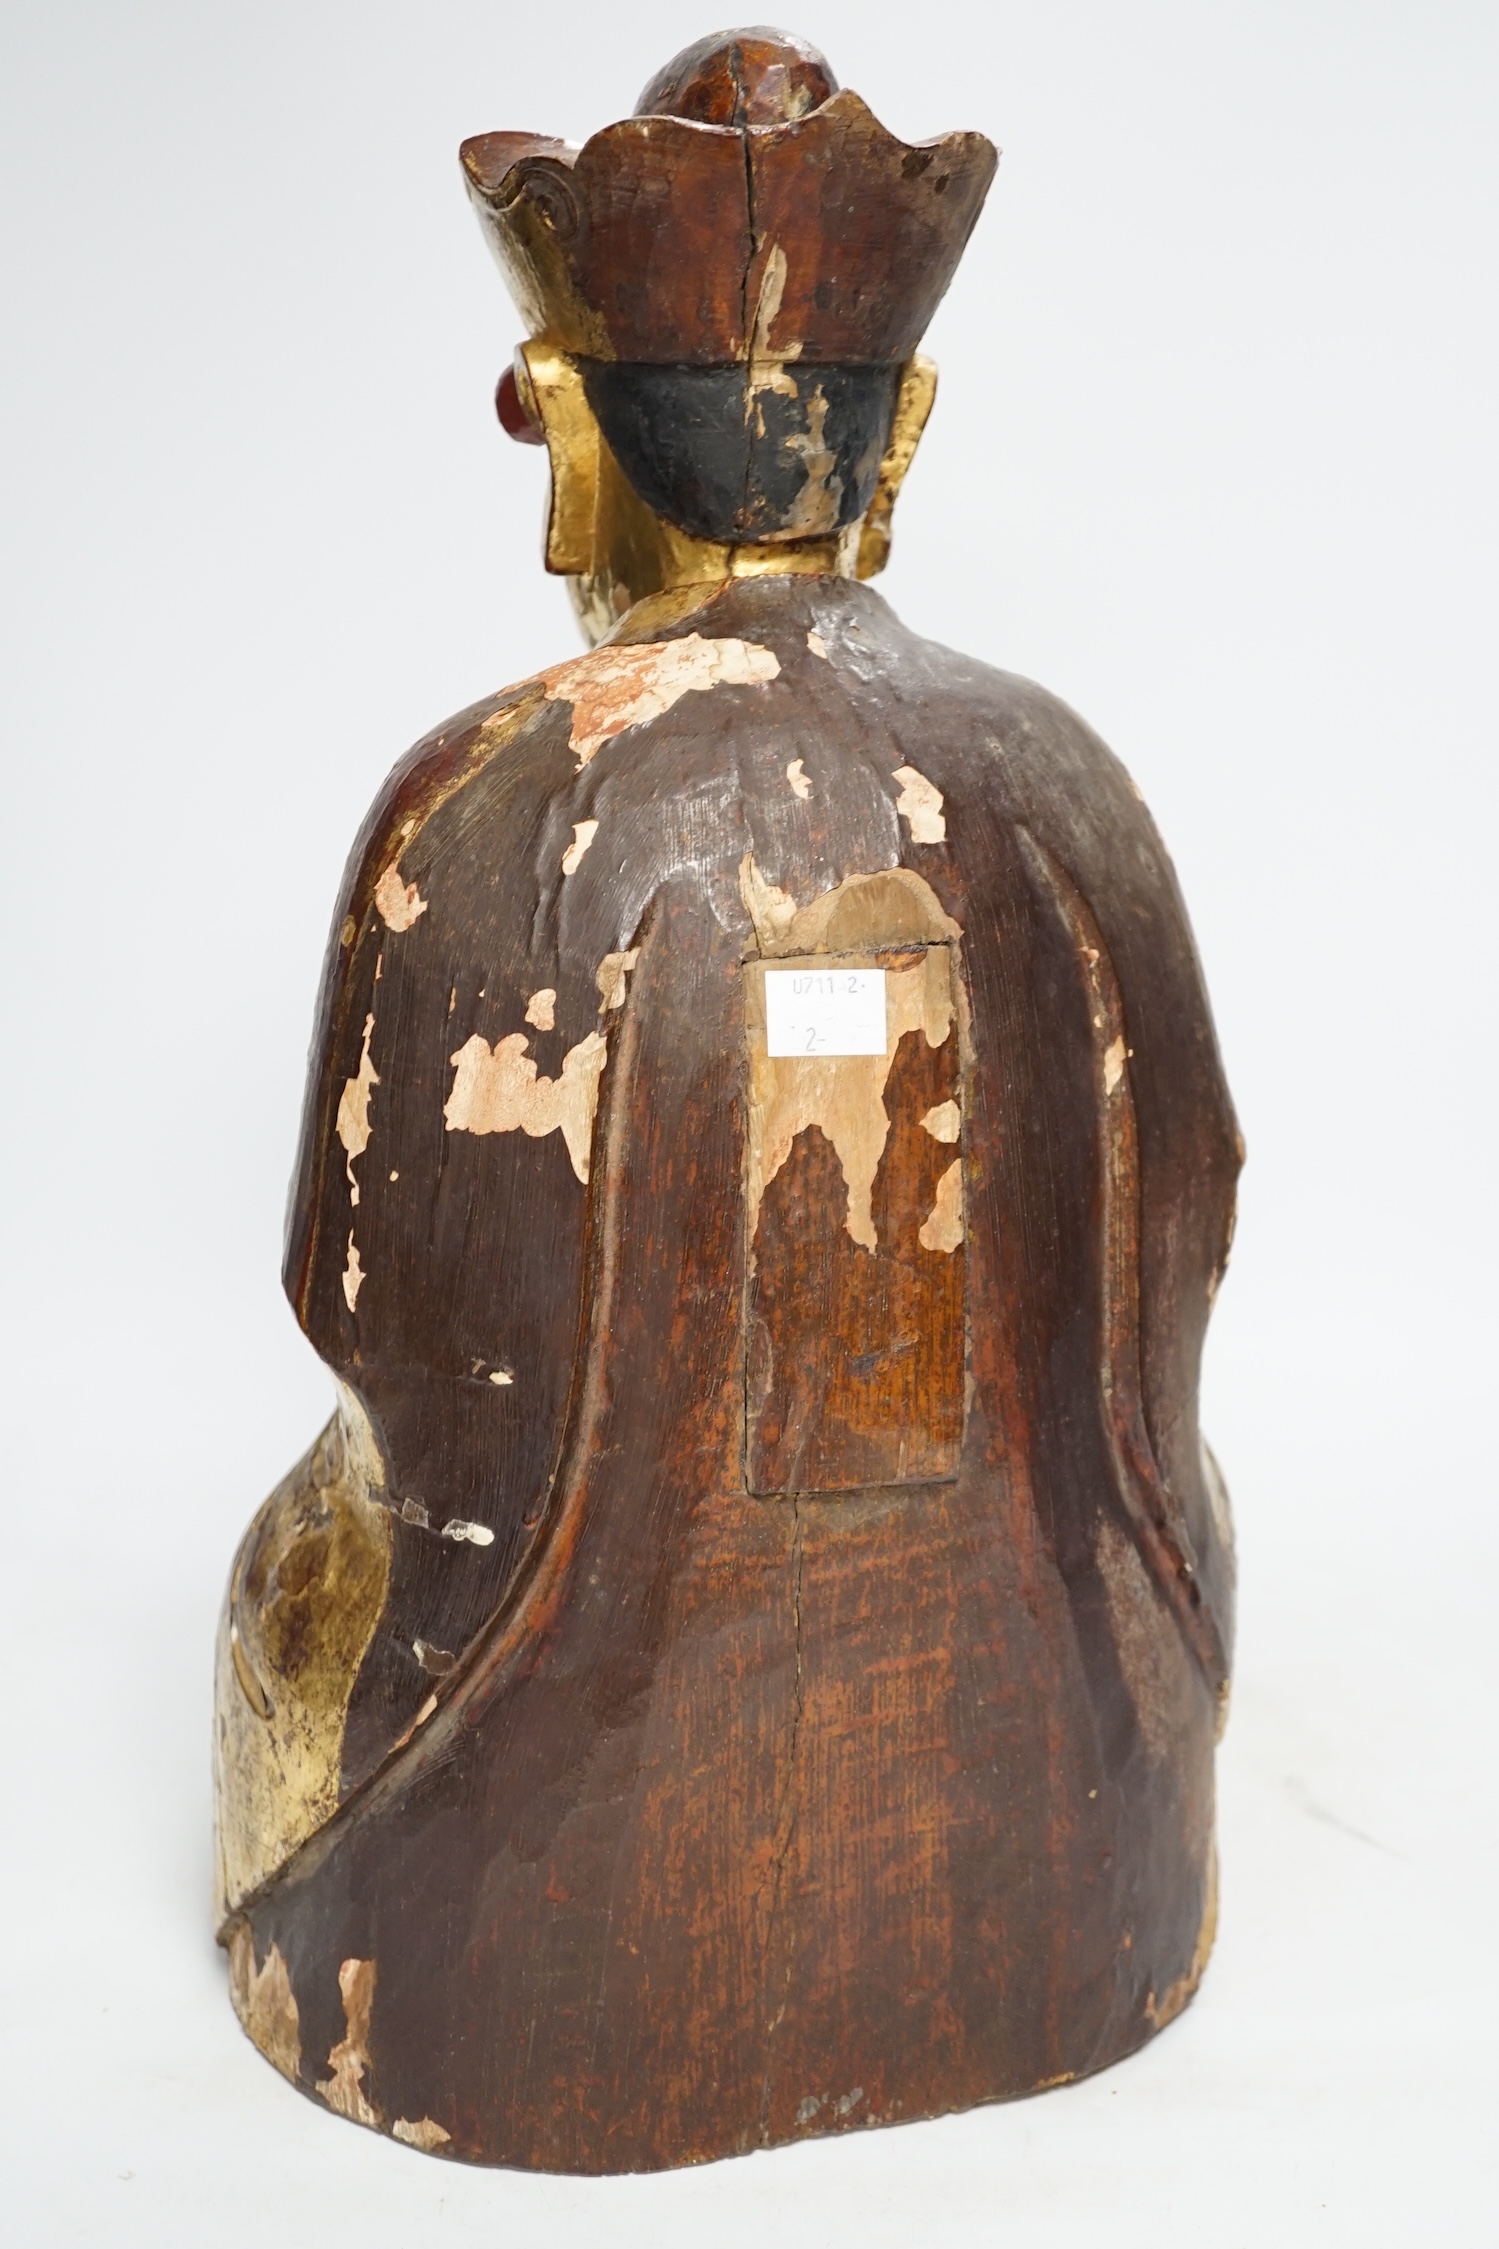 A Chinese gilt lacquered wooden figure of Buddha, possibly Yuan to Ming, 42cm high. Condition - poor to fair, losses to lacquer overall